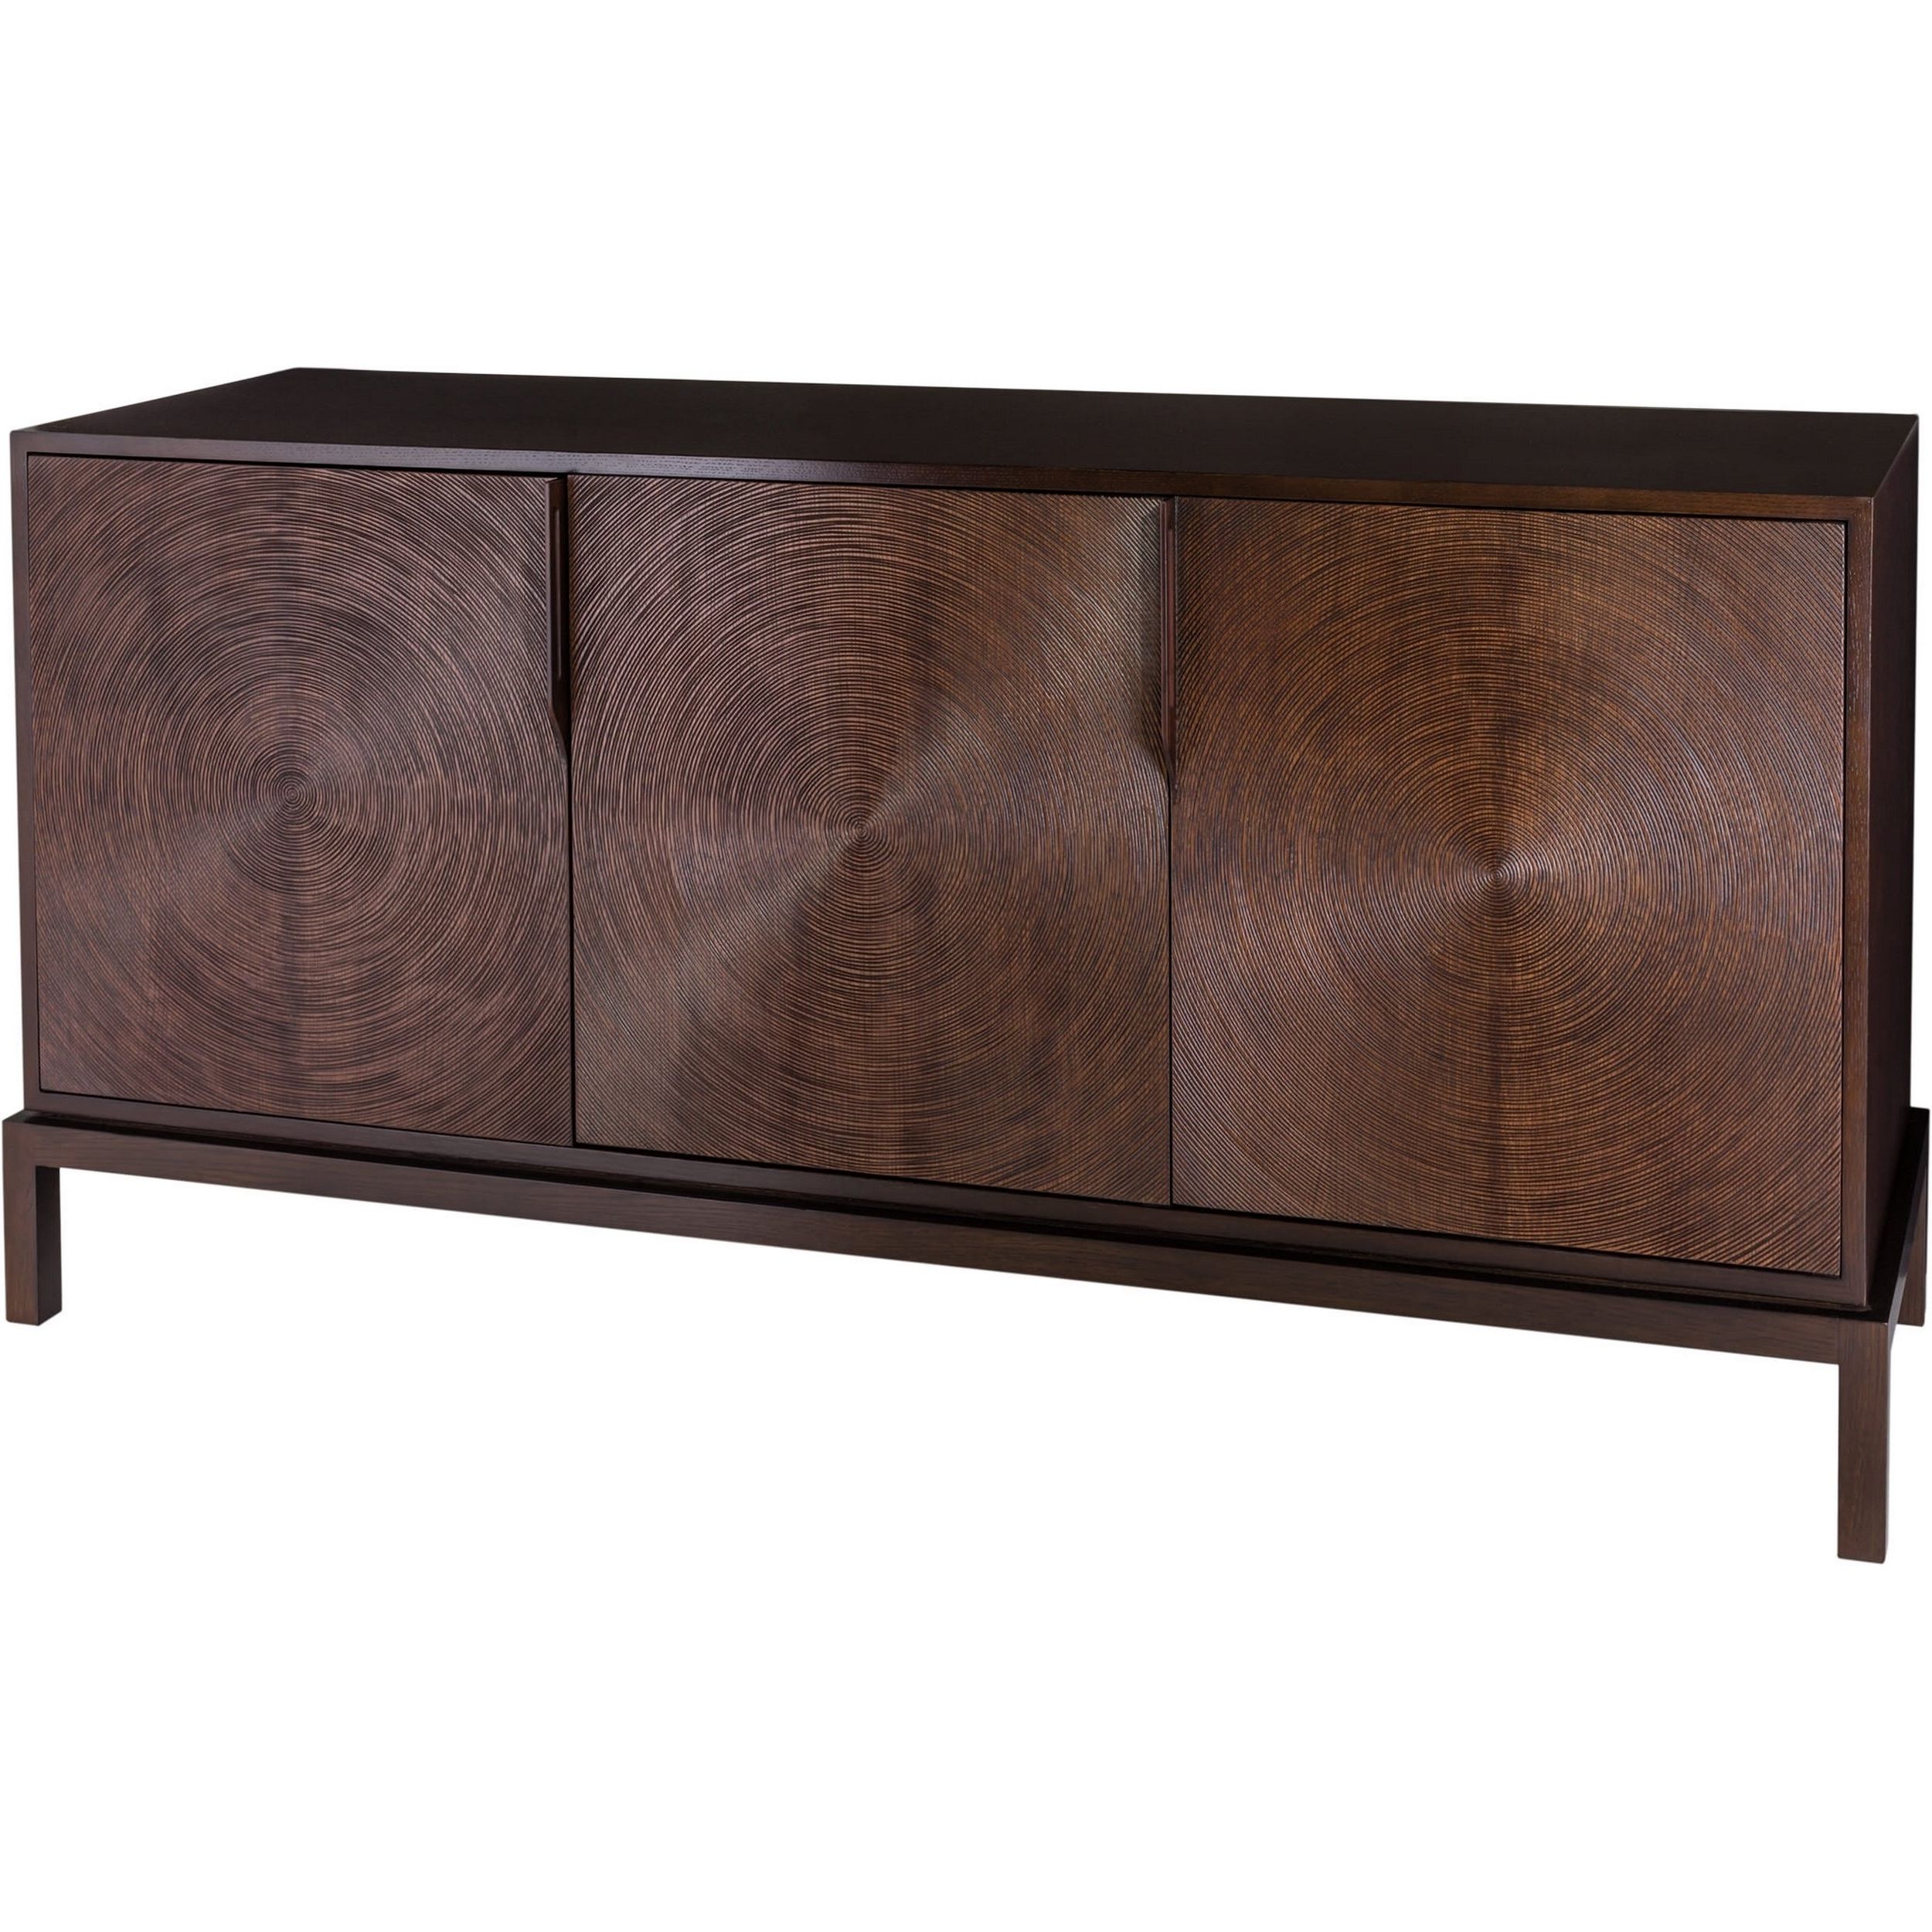 Safavieh Couture High Line Collection Elsie Mahogany Espresso Storage Buffet In Espresso Wood Multi Use Buffets (Gallery 9 of 20)